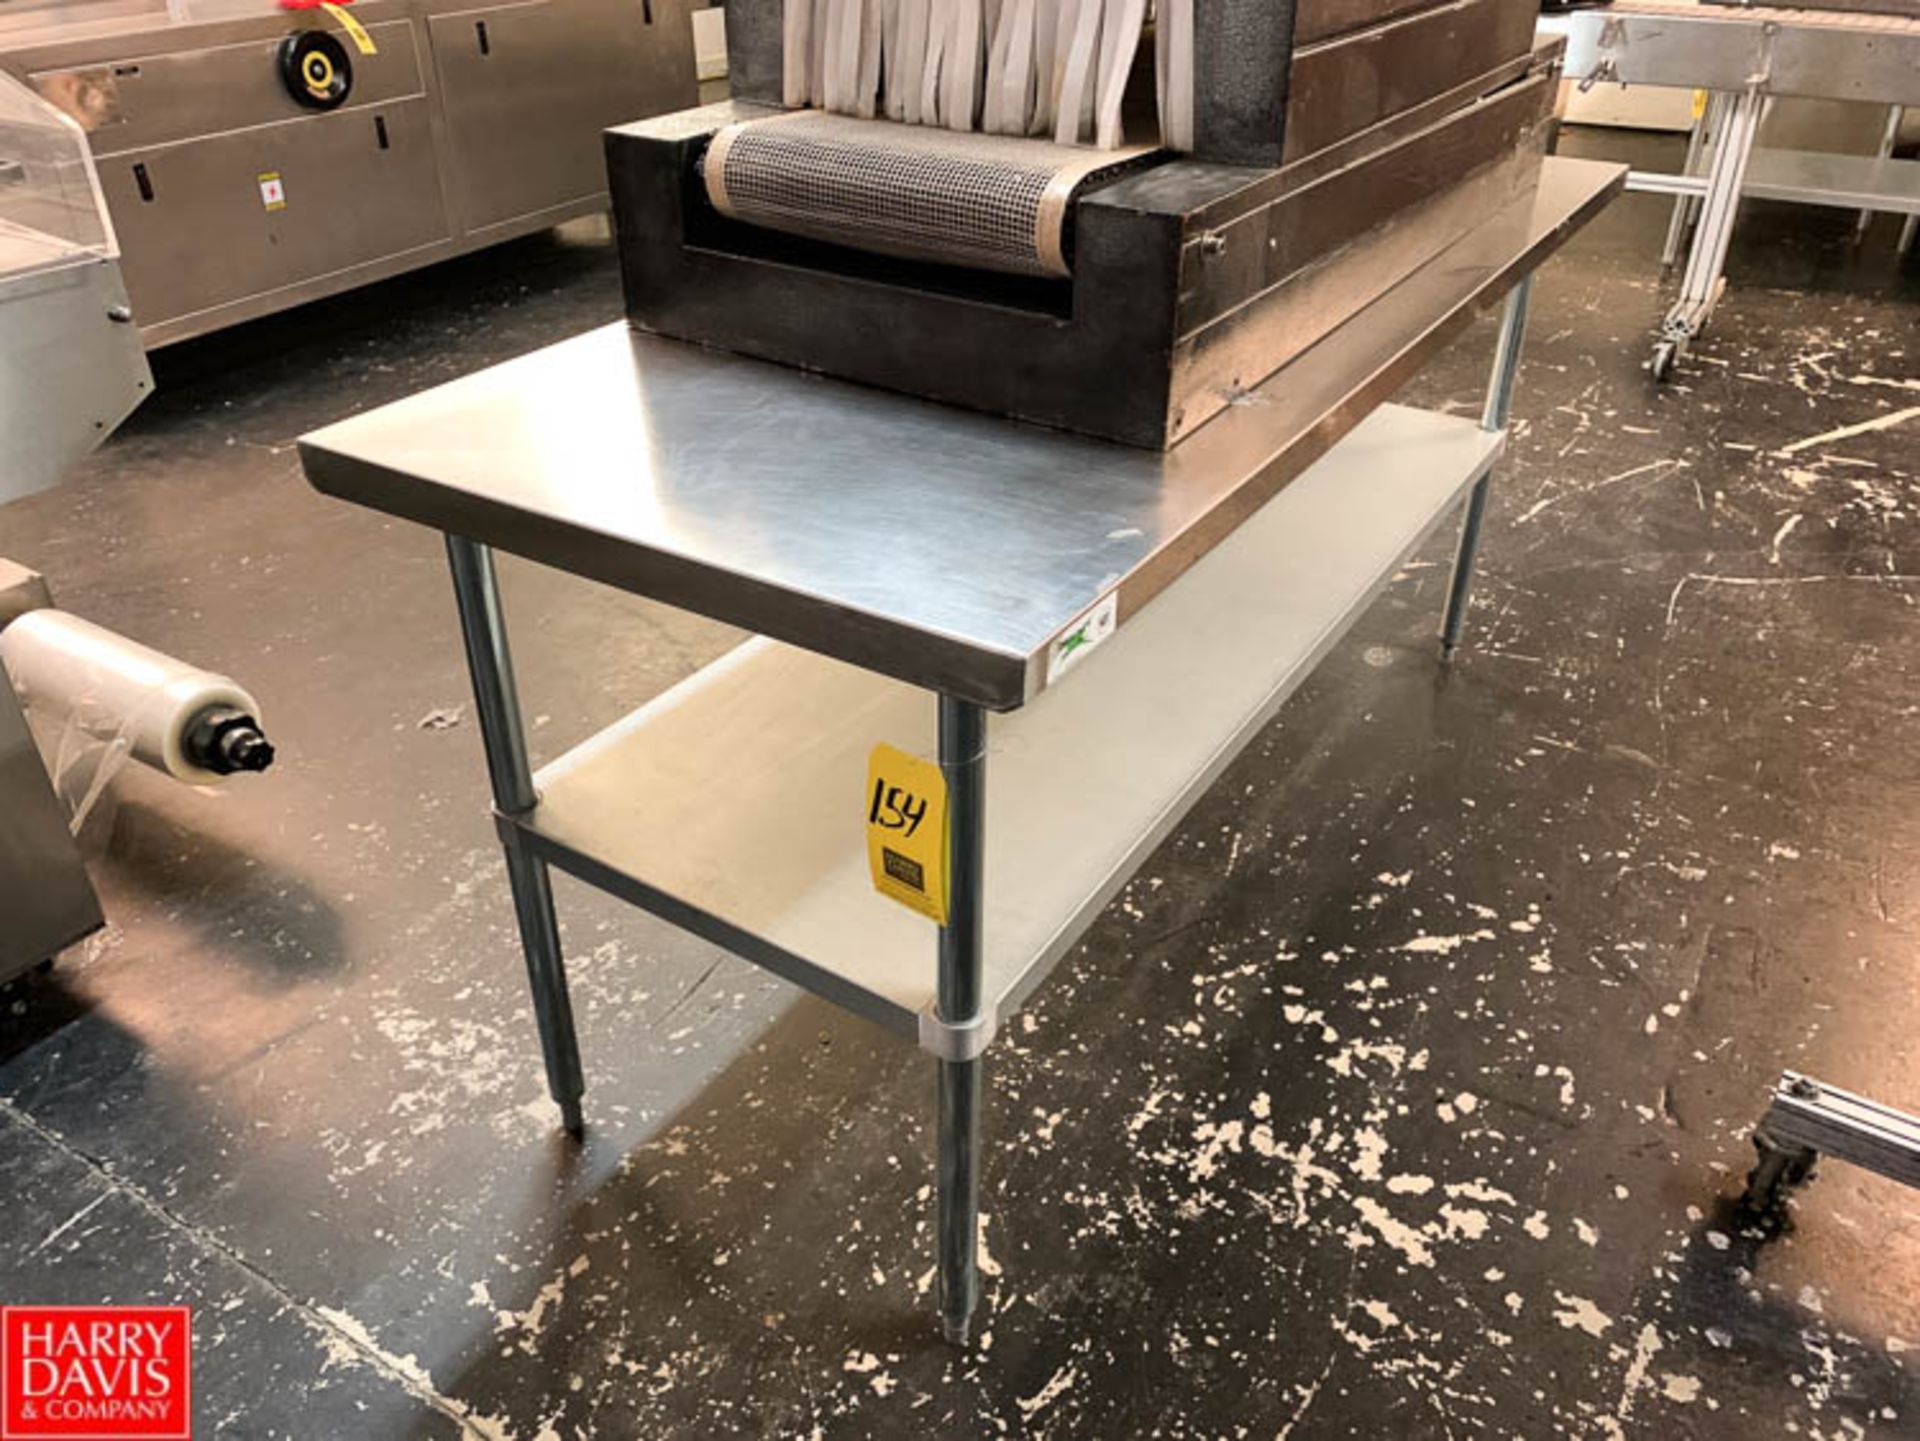 30" x 72" S/S Top Table with Under Shelf Rigging Prices: 45